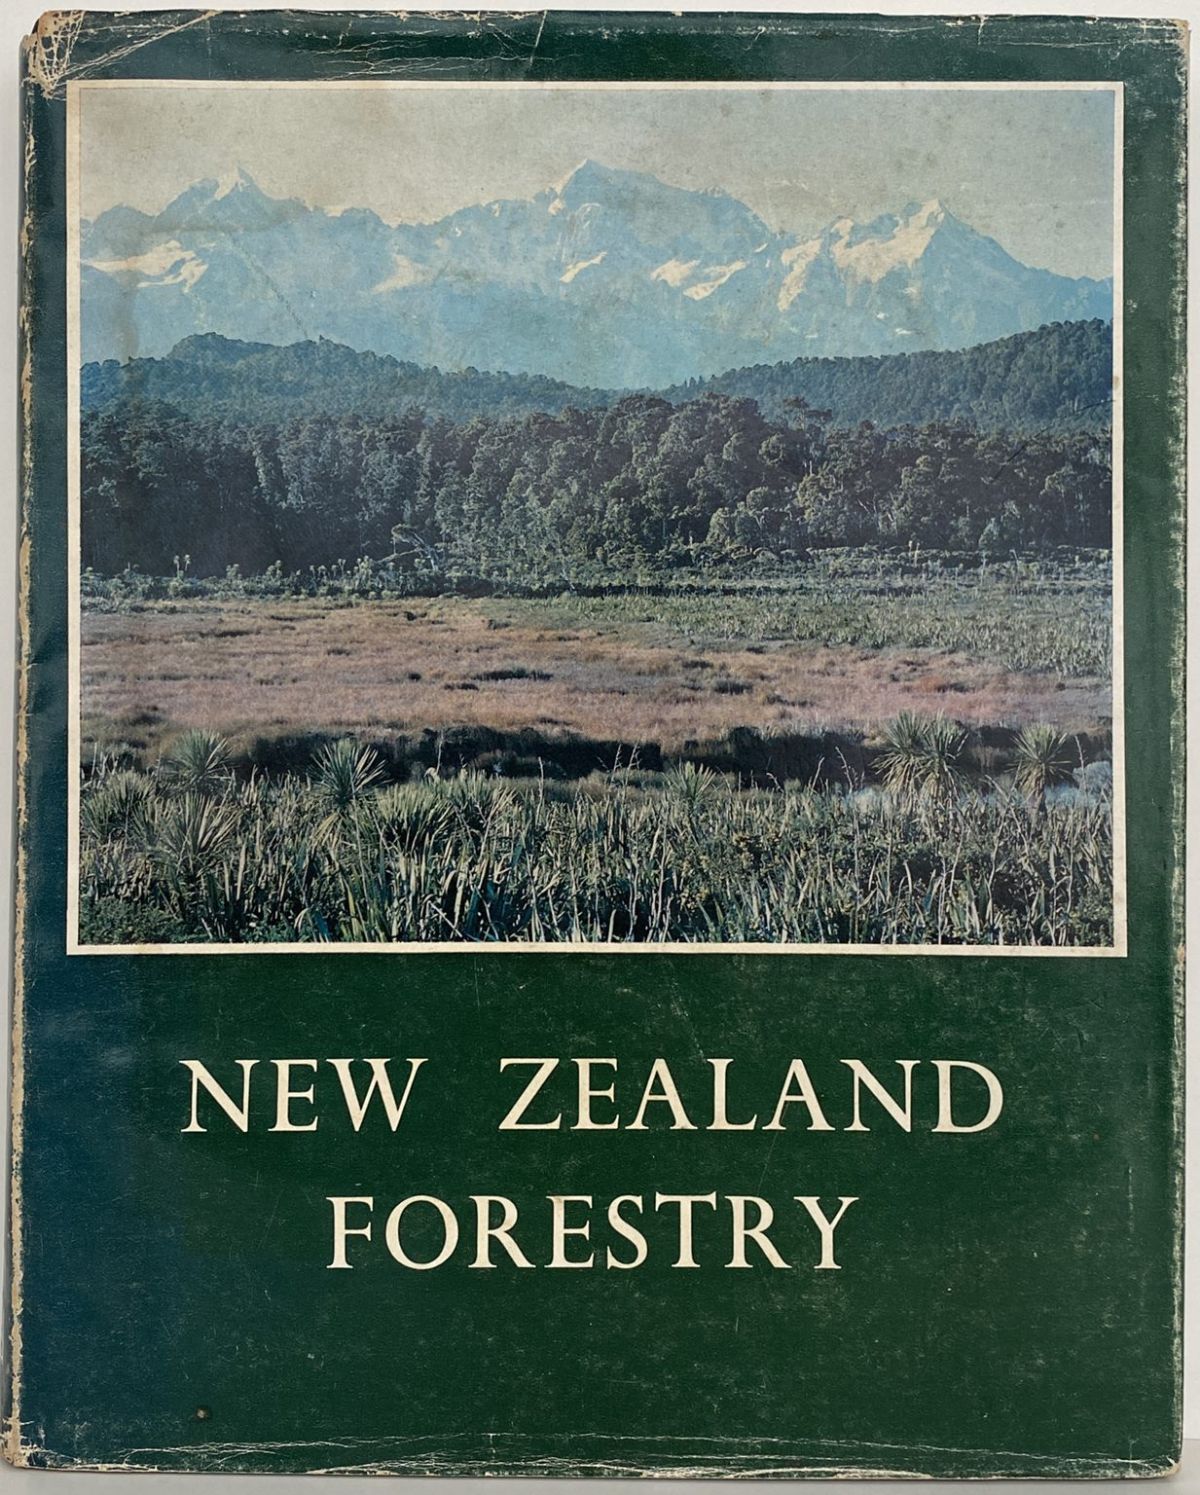 NEW ZEALAND FORESTRY